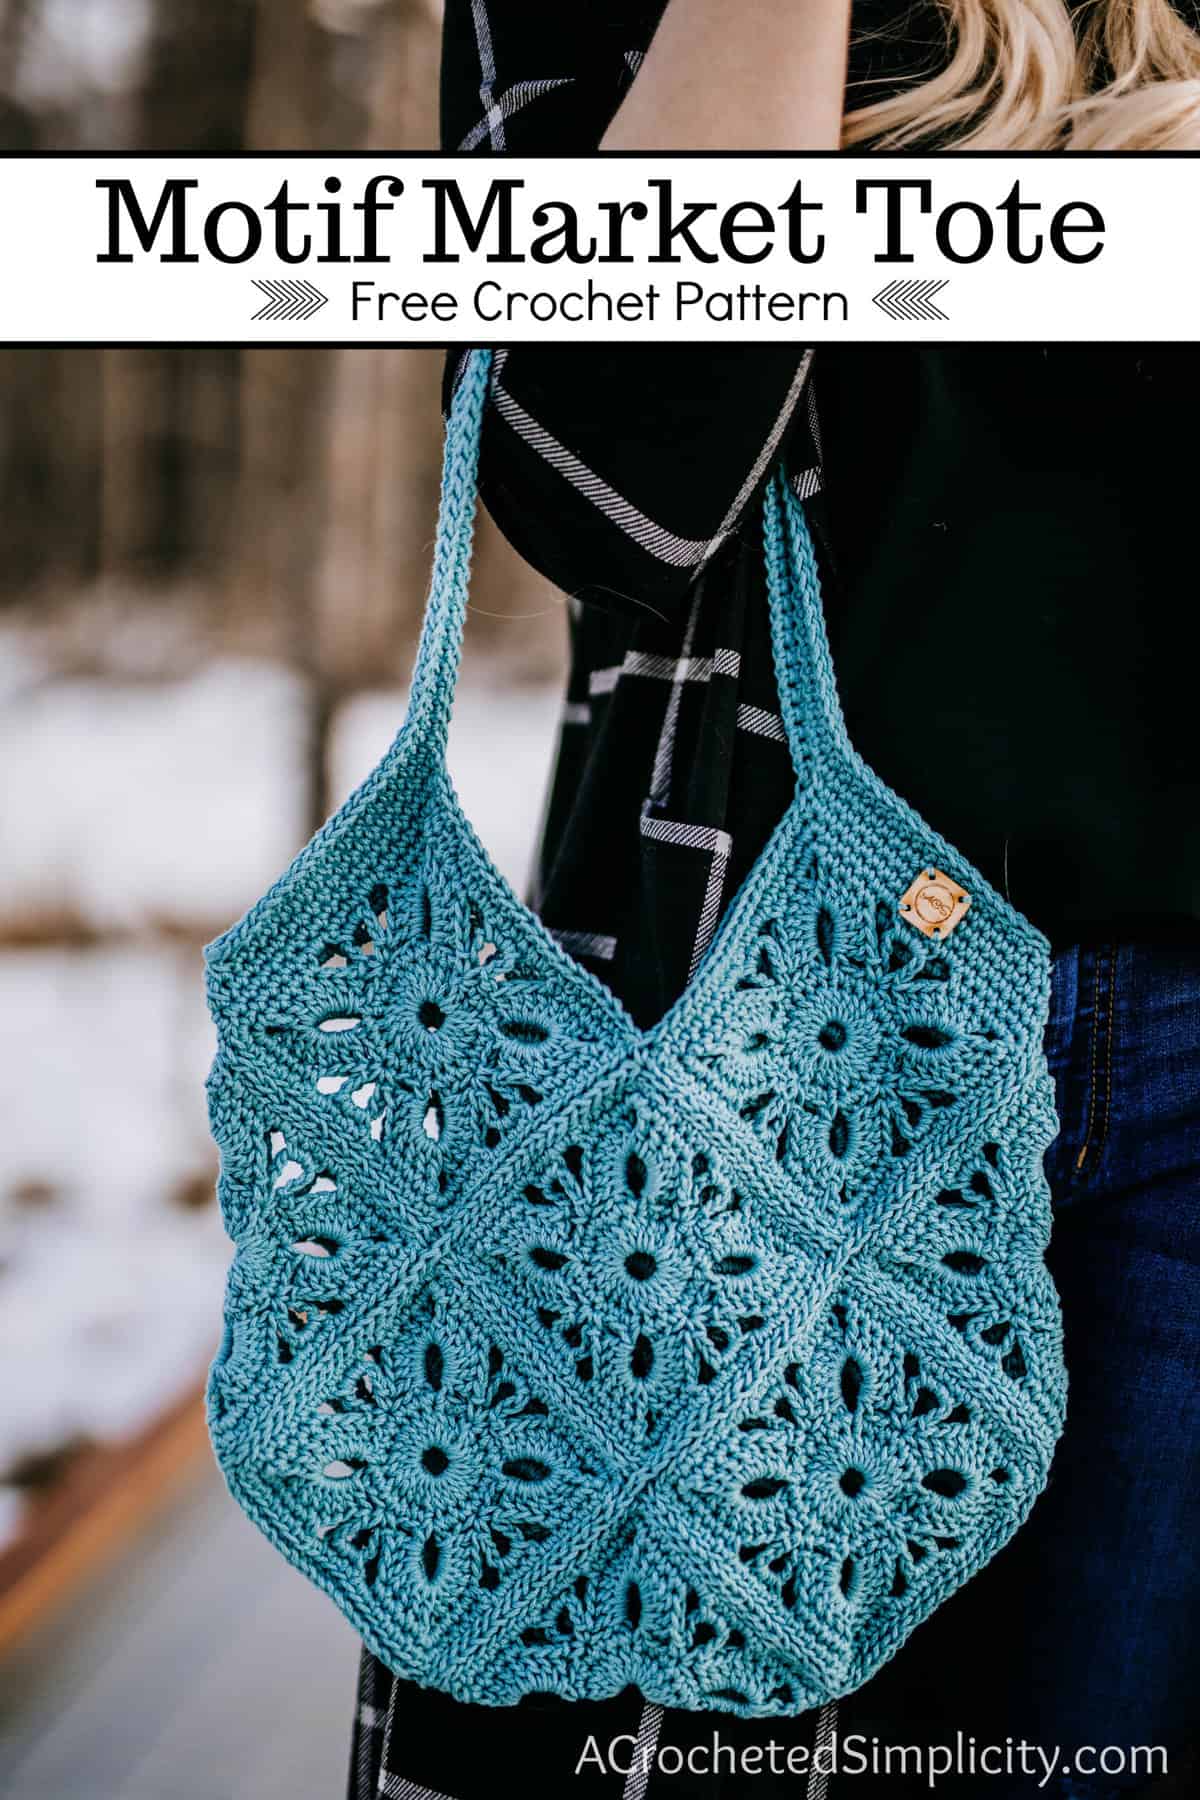 Crochet Patterns Bag Assembly of Granny Bags | Granny square crochet pattern,  Crochet bag pattern, Crochet squares